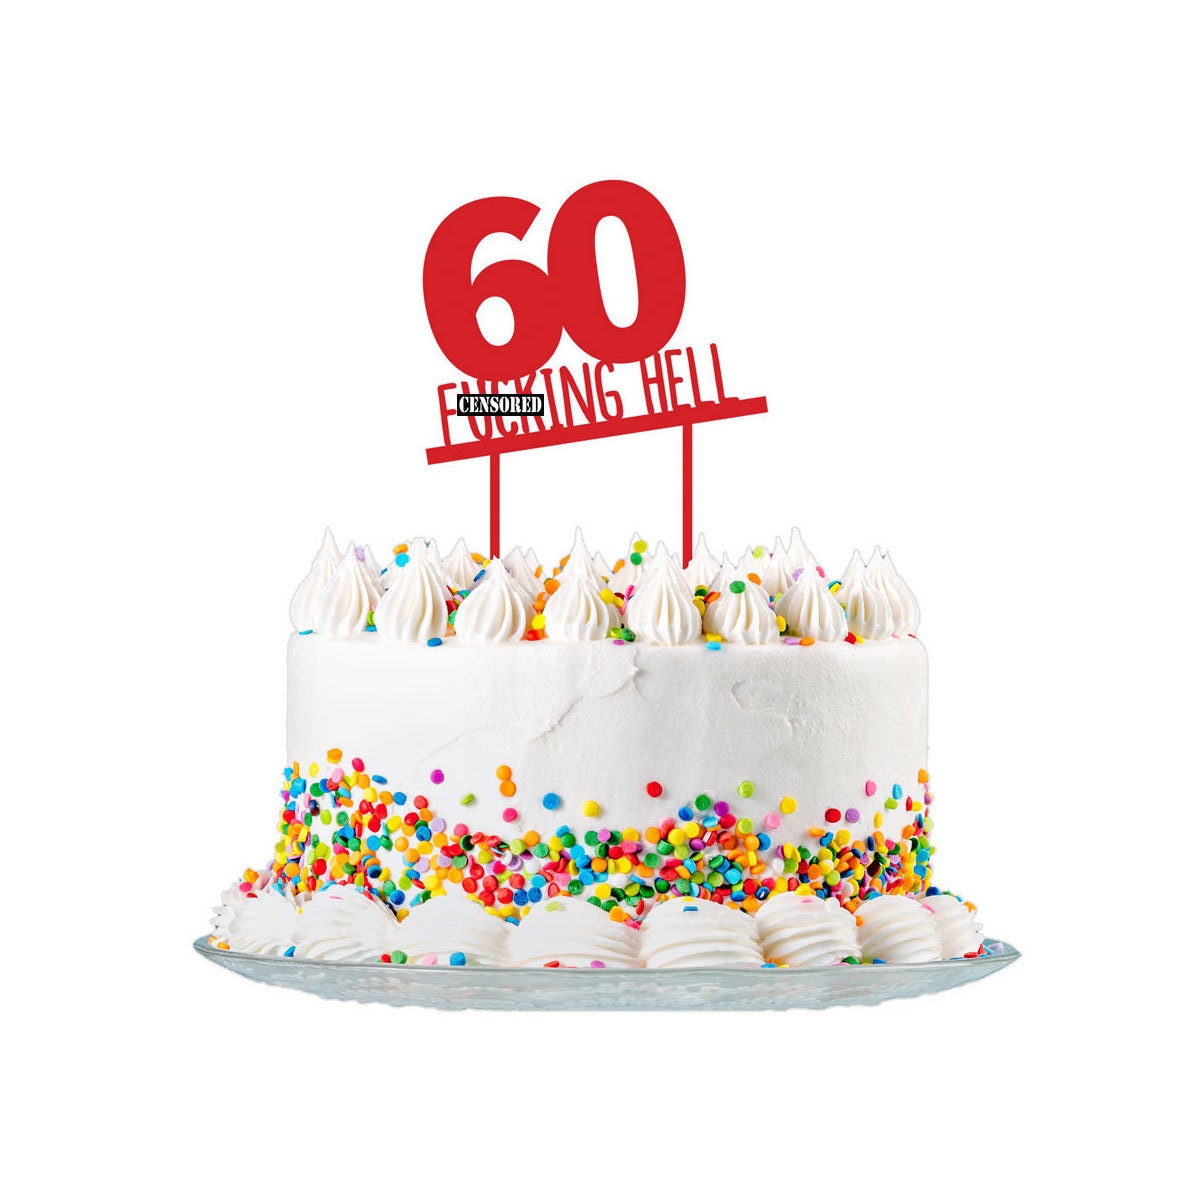 60th Birthday Cake Topper Cut From 3mm Red Acrylic for Men & - Etsy Finland